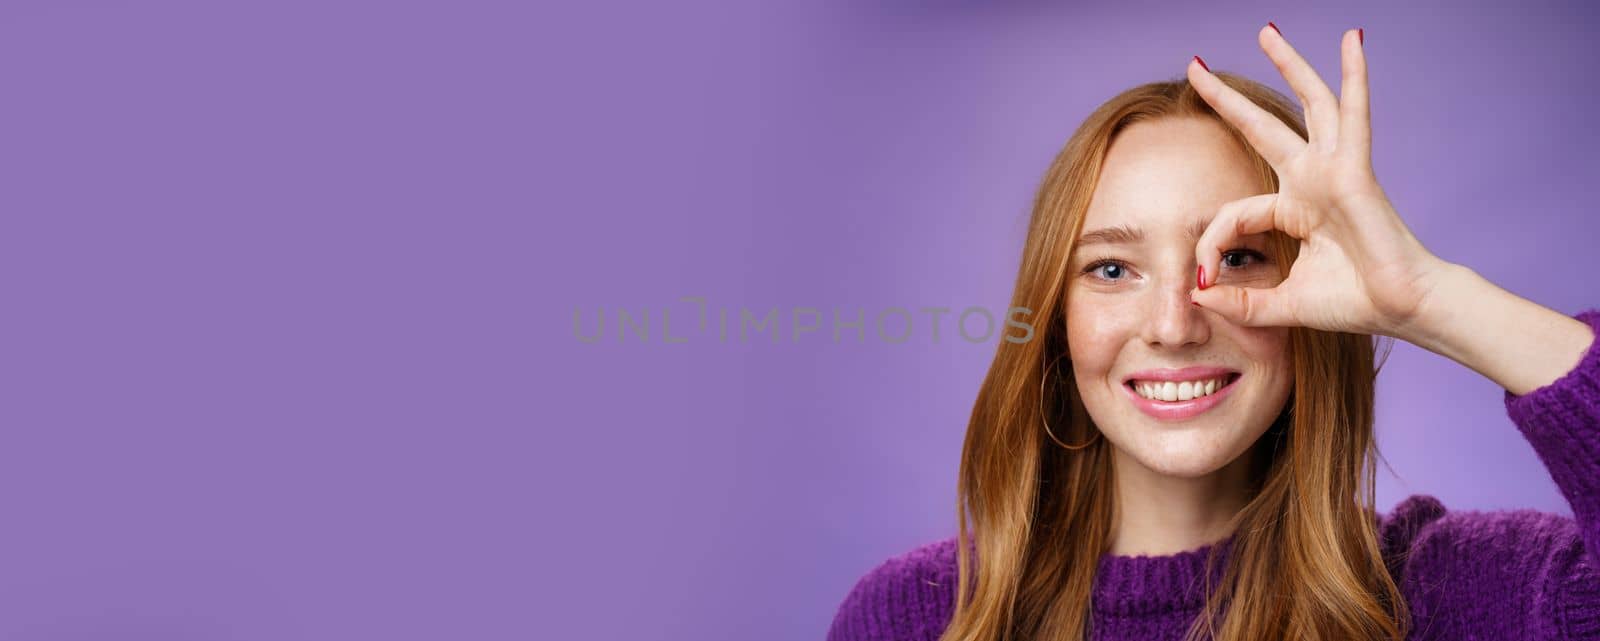 Headshot of optimistic and playful kind cute redhead female with freckles and white perfect smile showing okay or zero sign on eye, grinning as peeking through hole at camera over purple background.